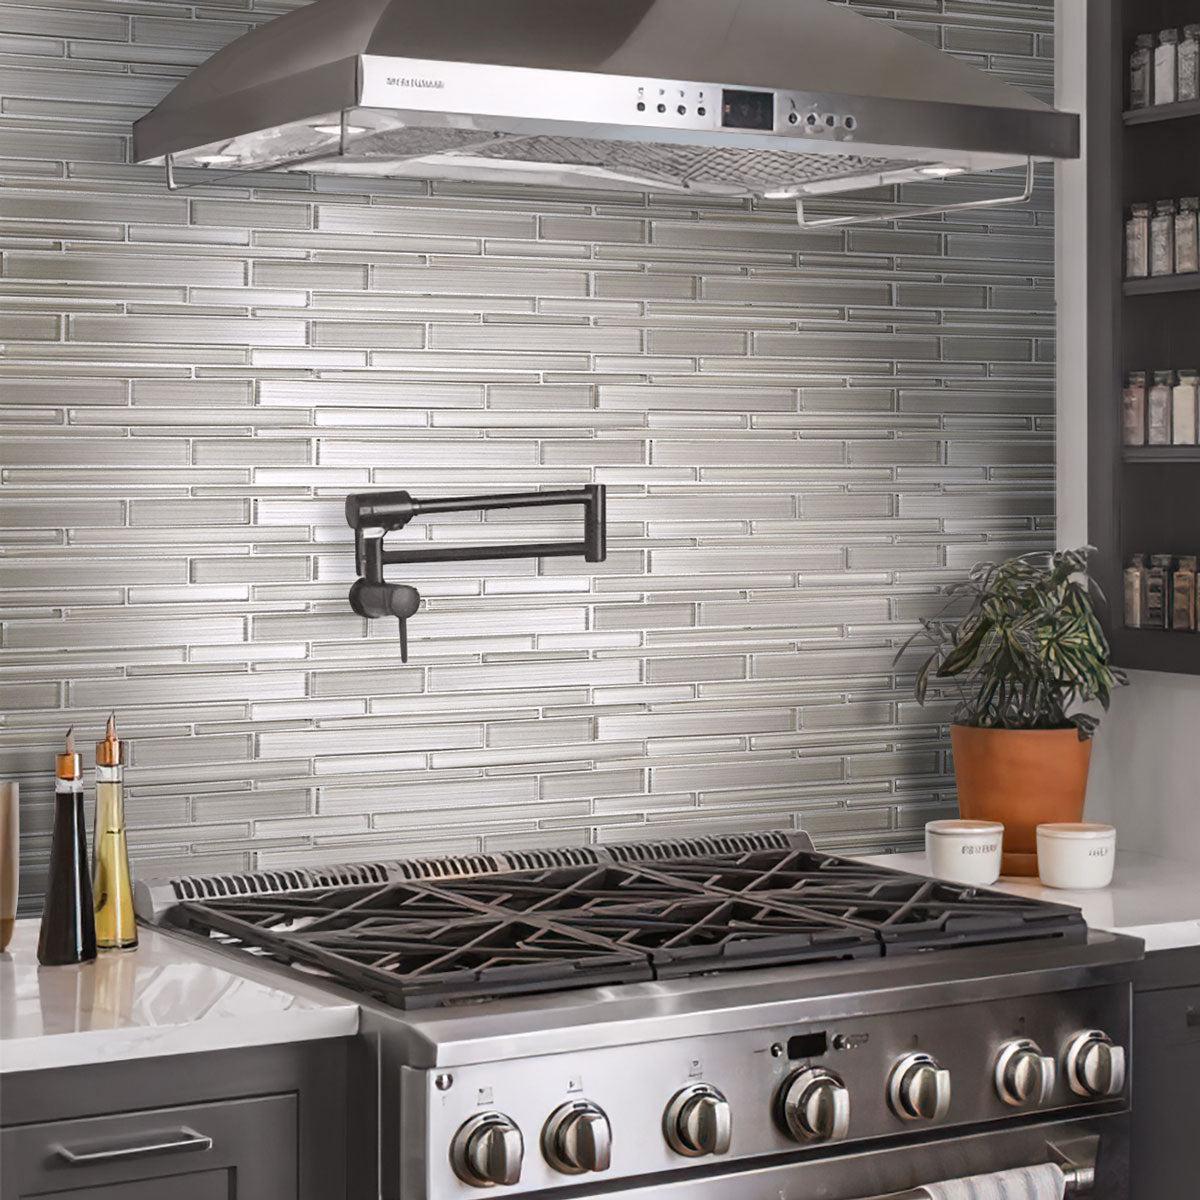 Fabrique White Linear Glass Mosaic Tile behind the stove